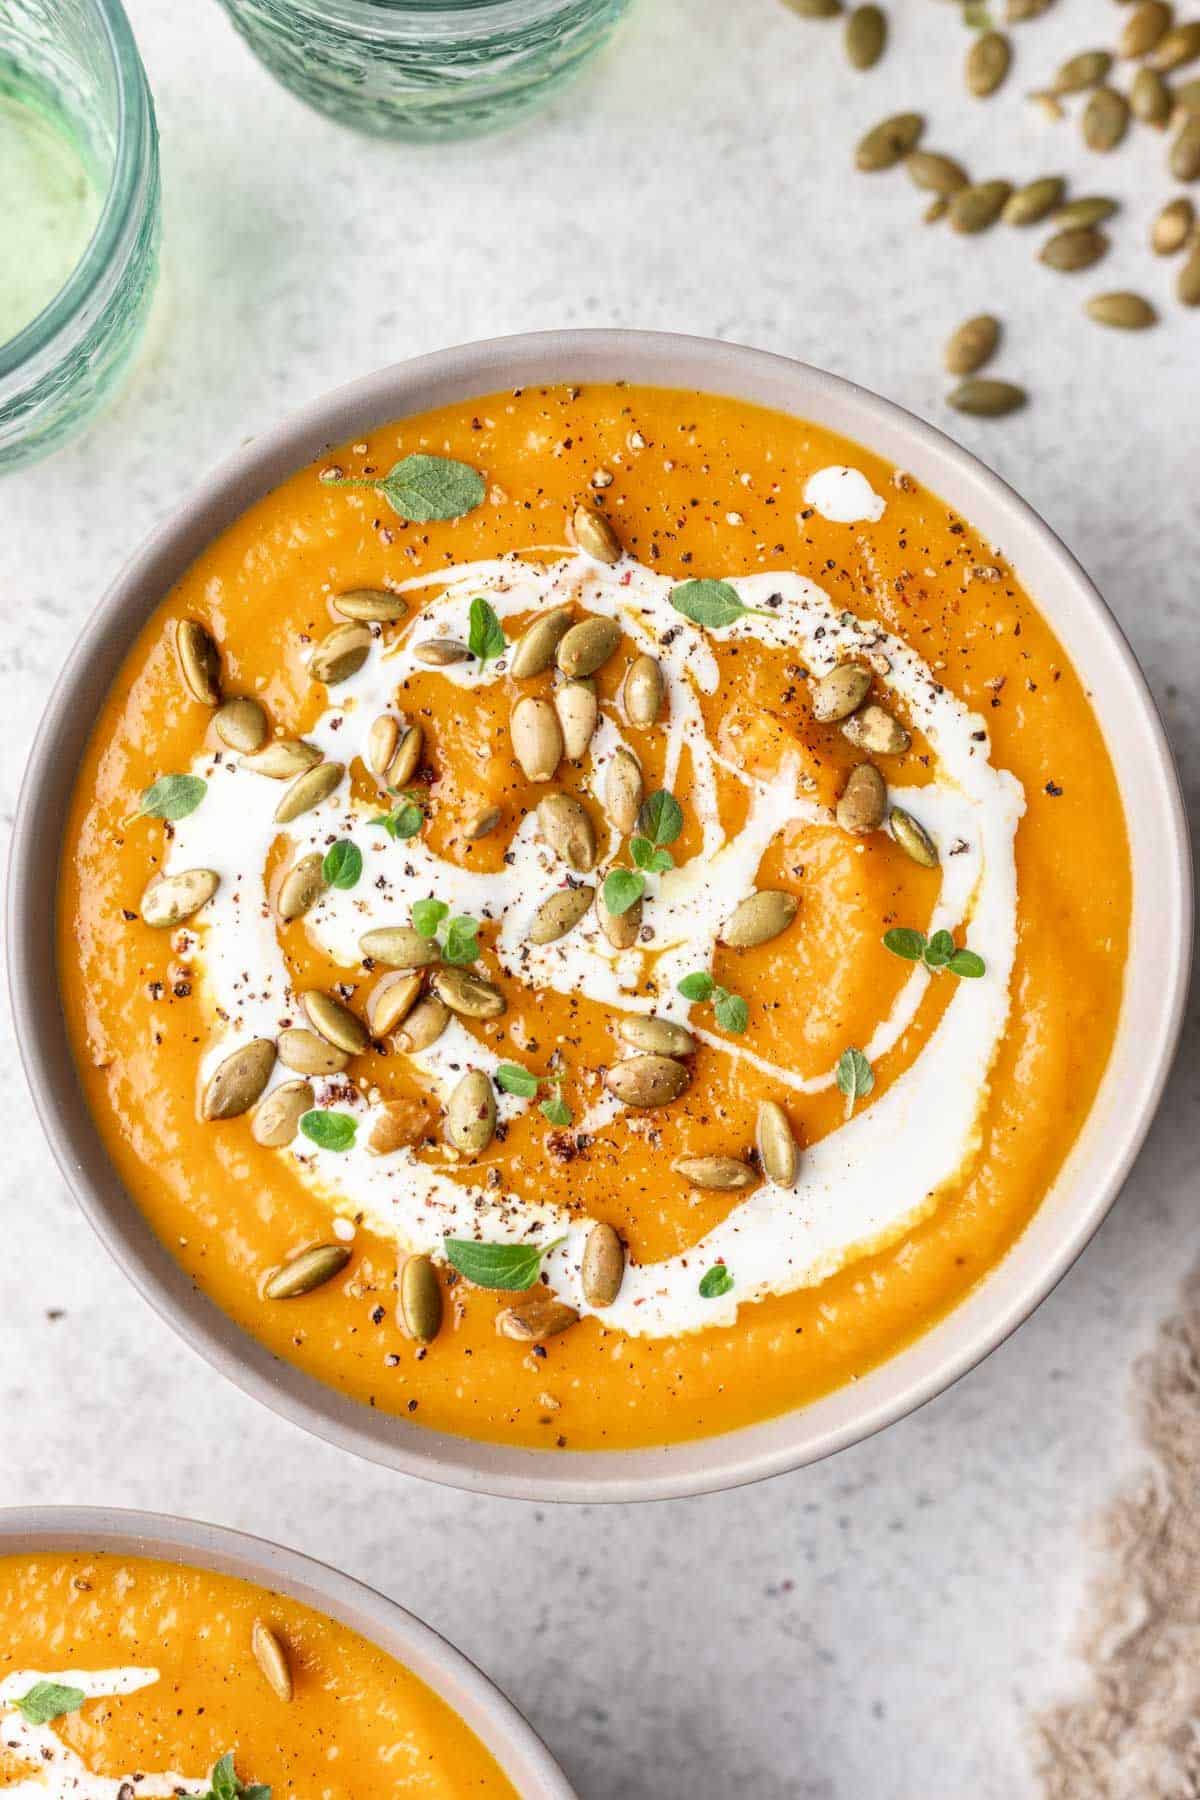 Butternut squash soup garnished with cream, pumpkin seeds, and herbs.